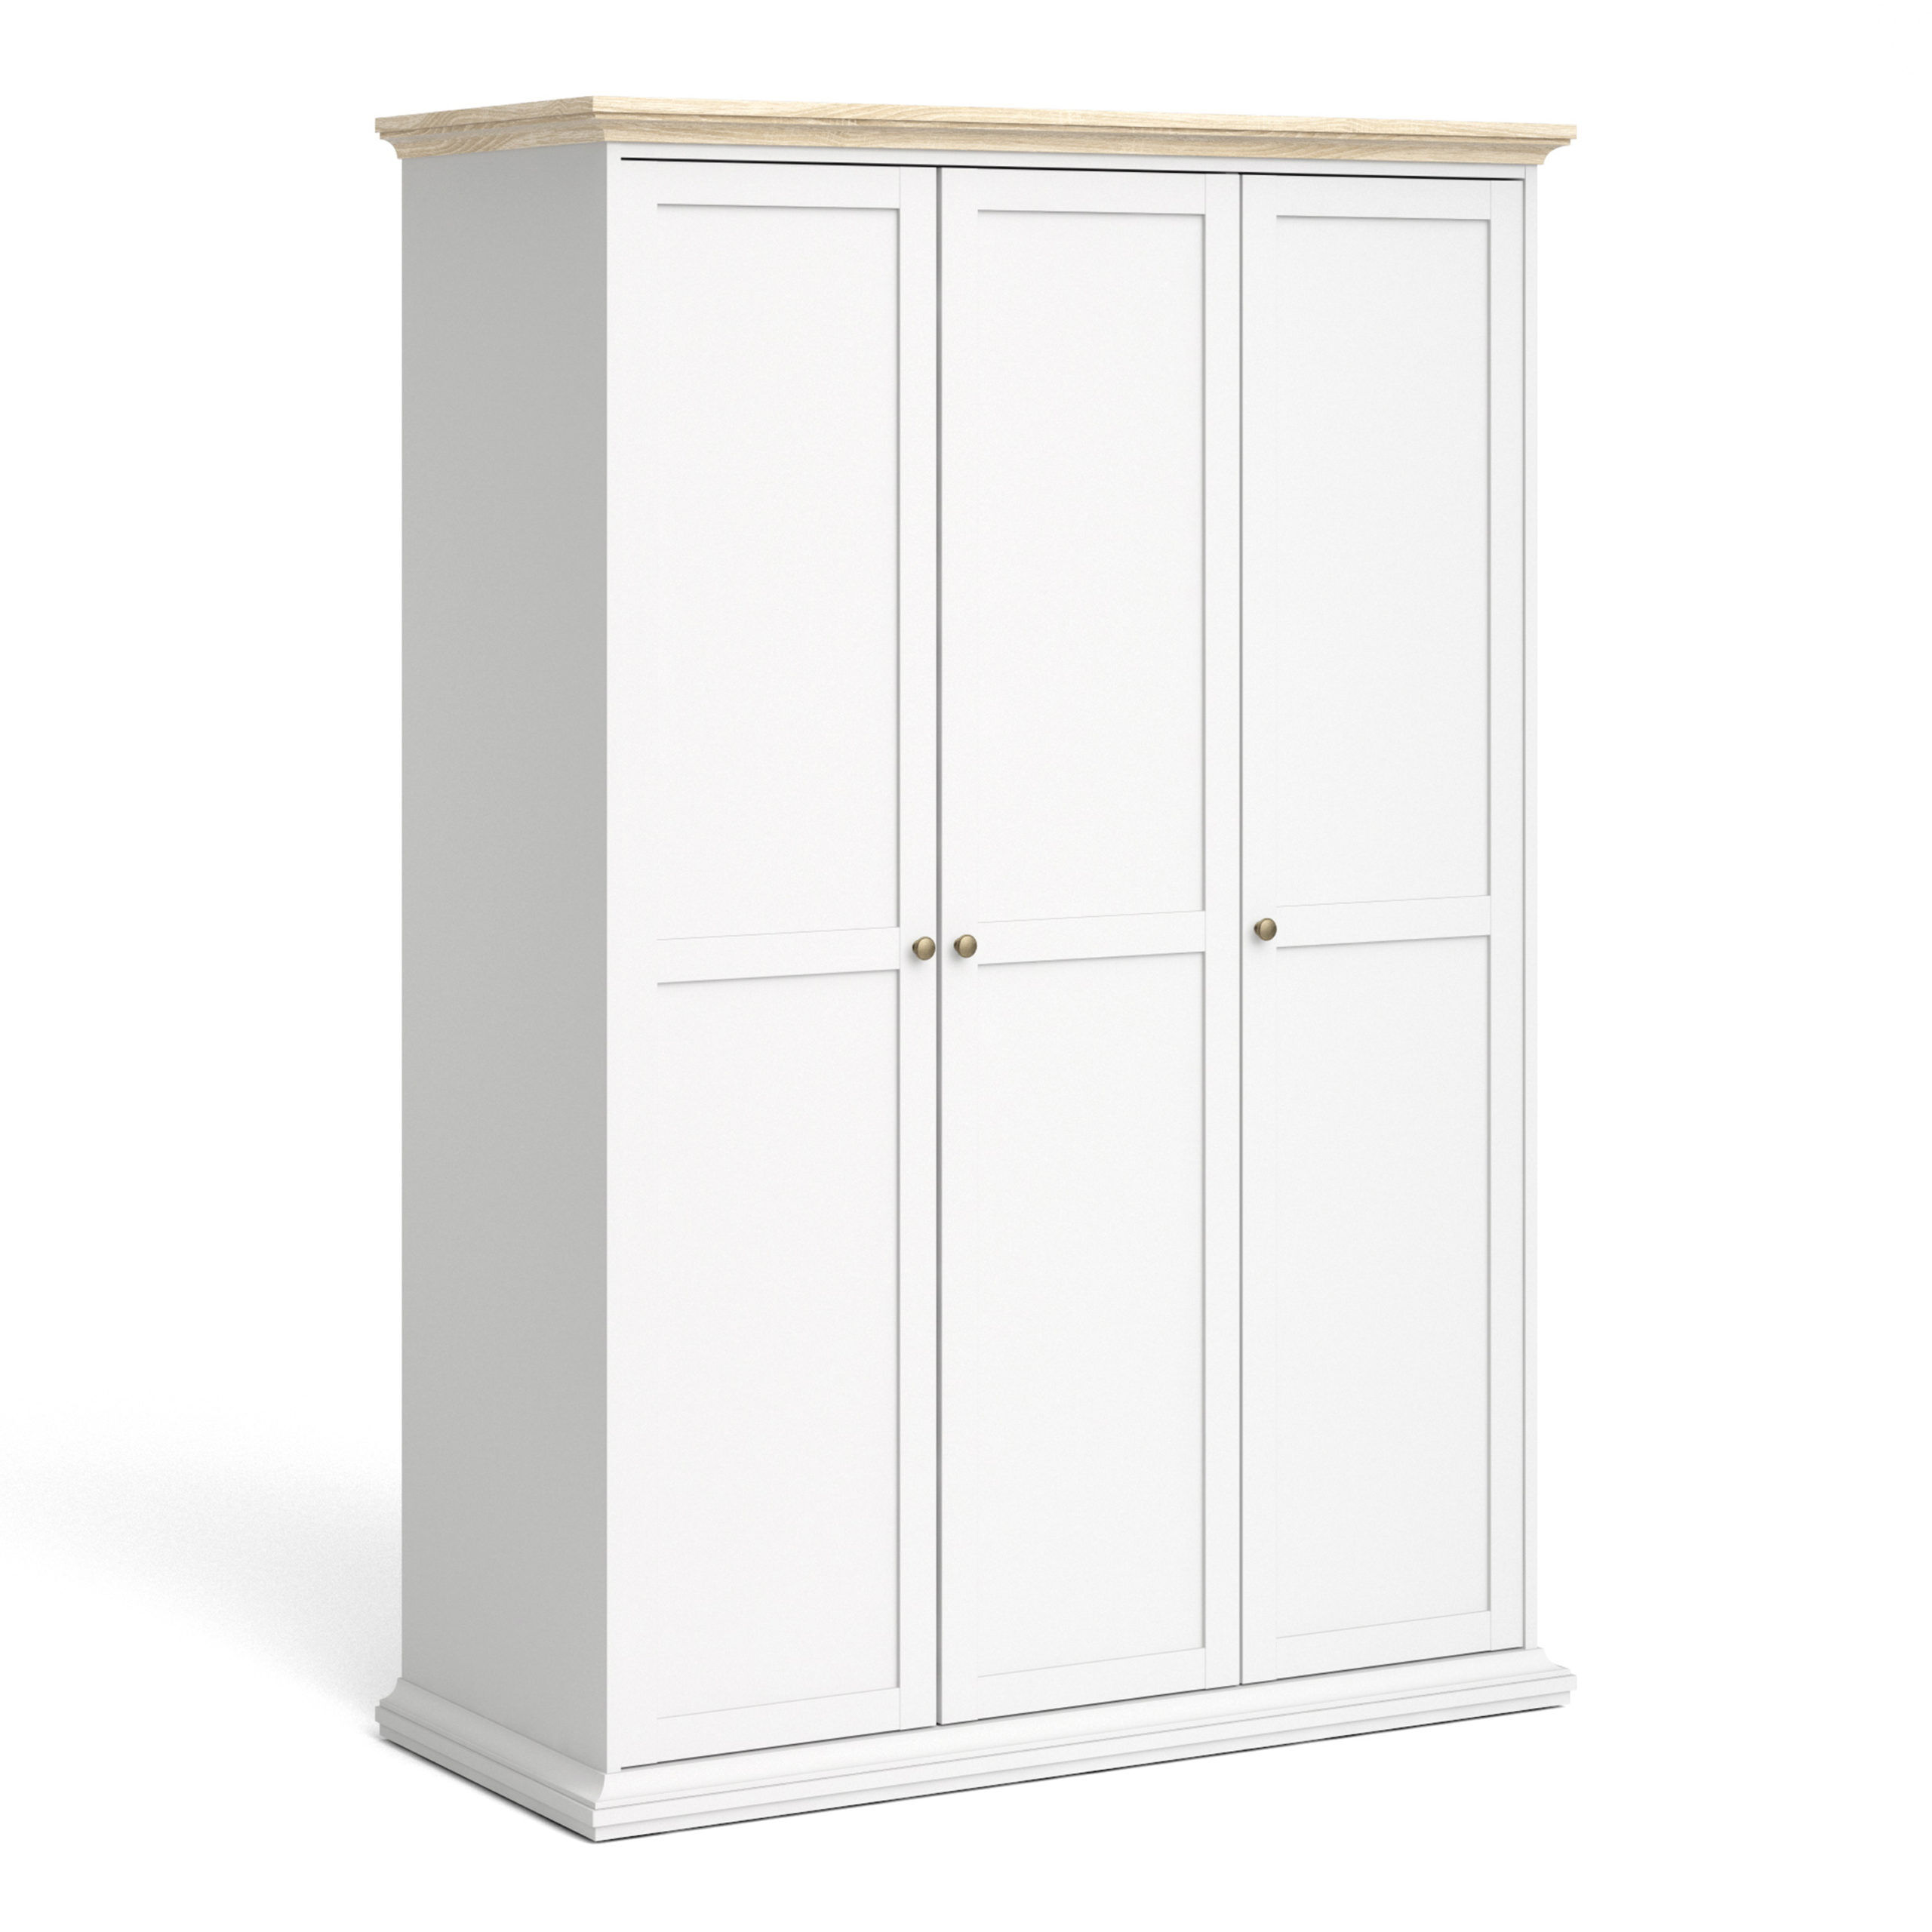 Condo Wardrobe with 3 Doors   White and Oak   Self Assembly